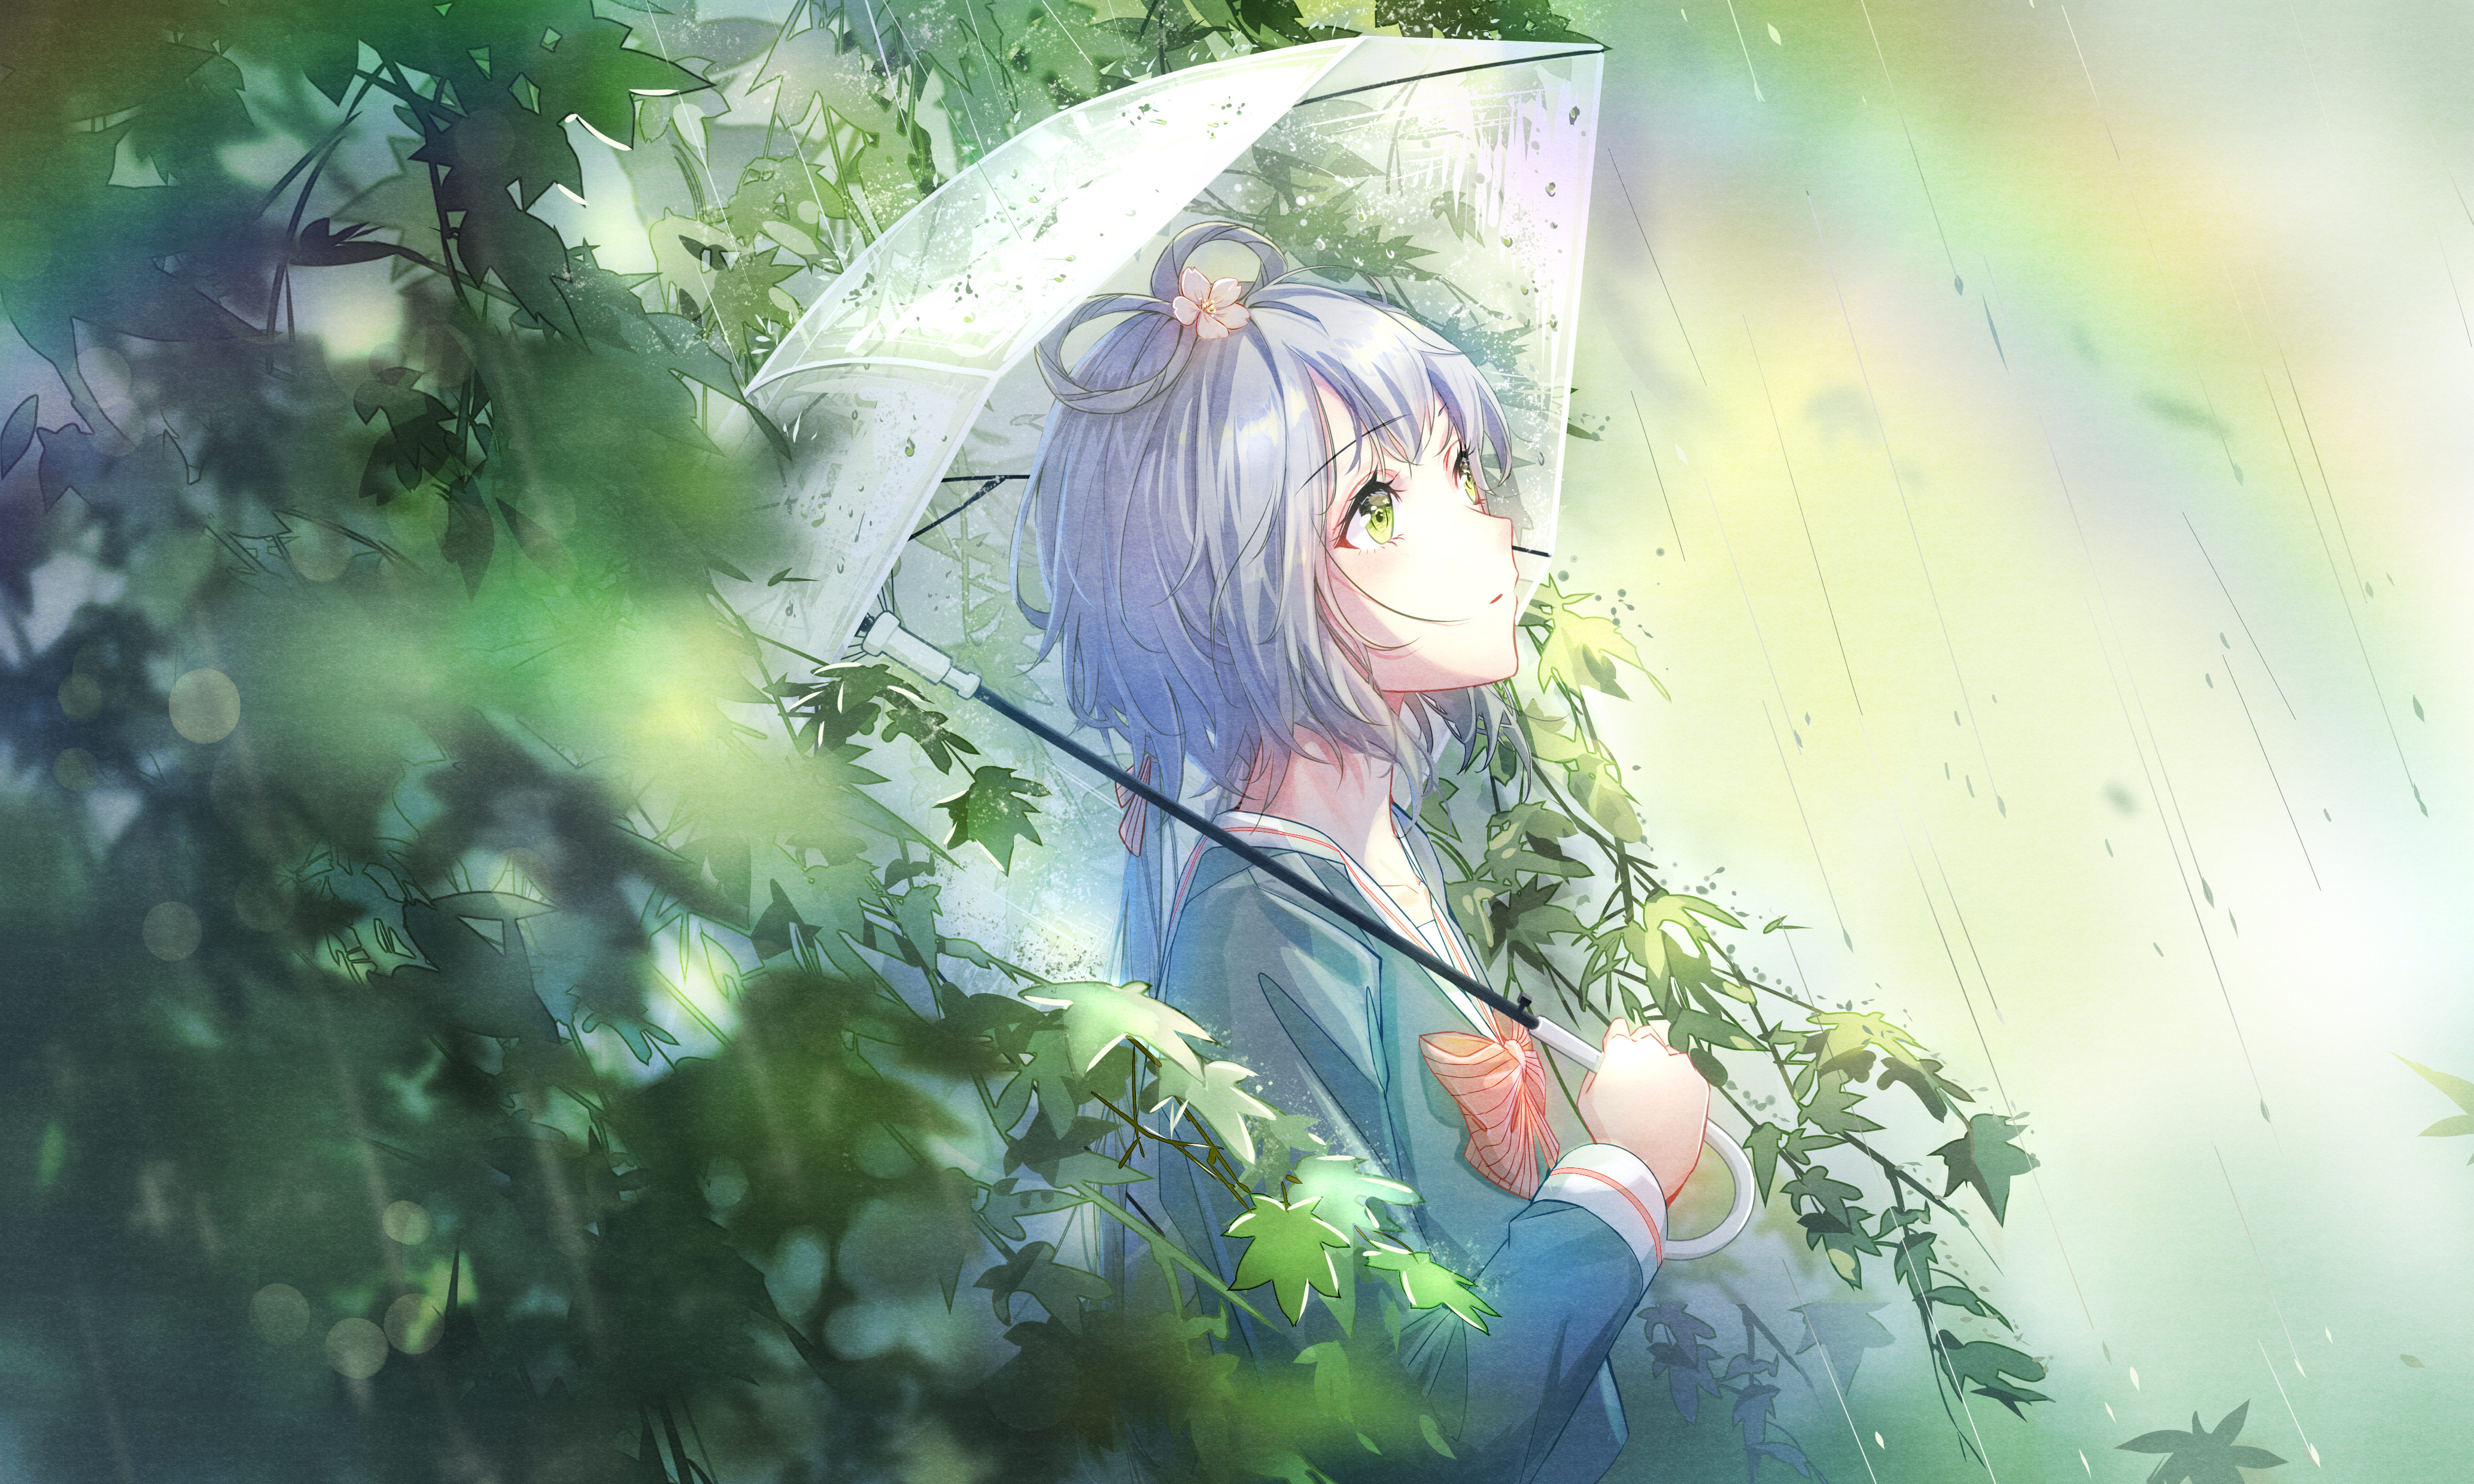 Luo Tianyi Vocaloid Vocaloid China Anime Girls Umbrella Rain Looking Up Leaves Bow Tie Rainbows 4134x2480